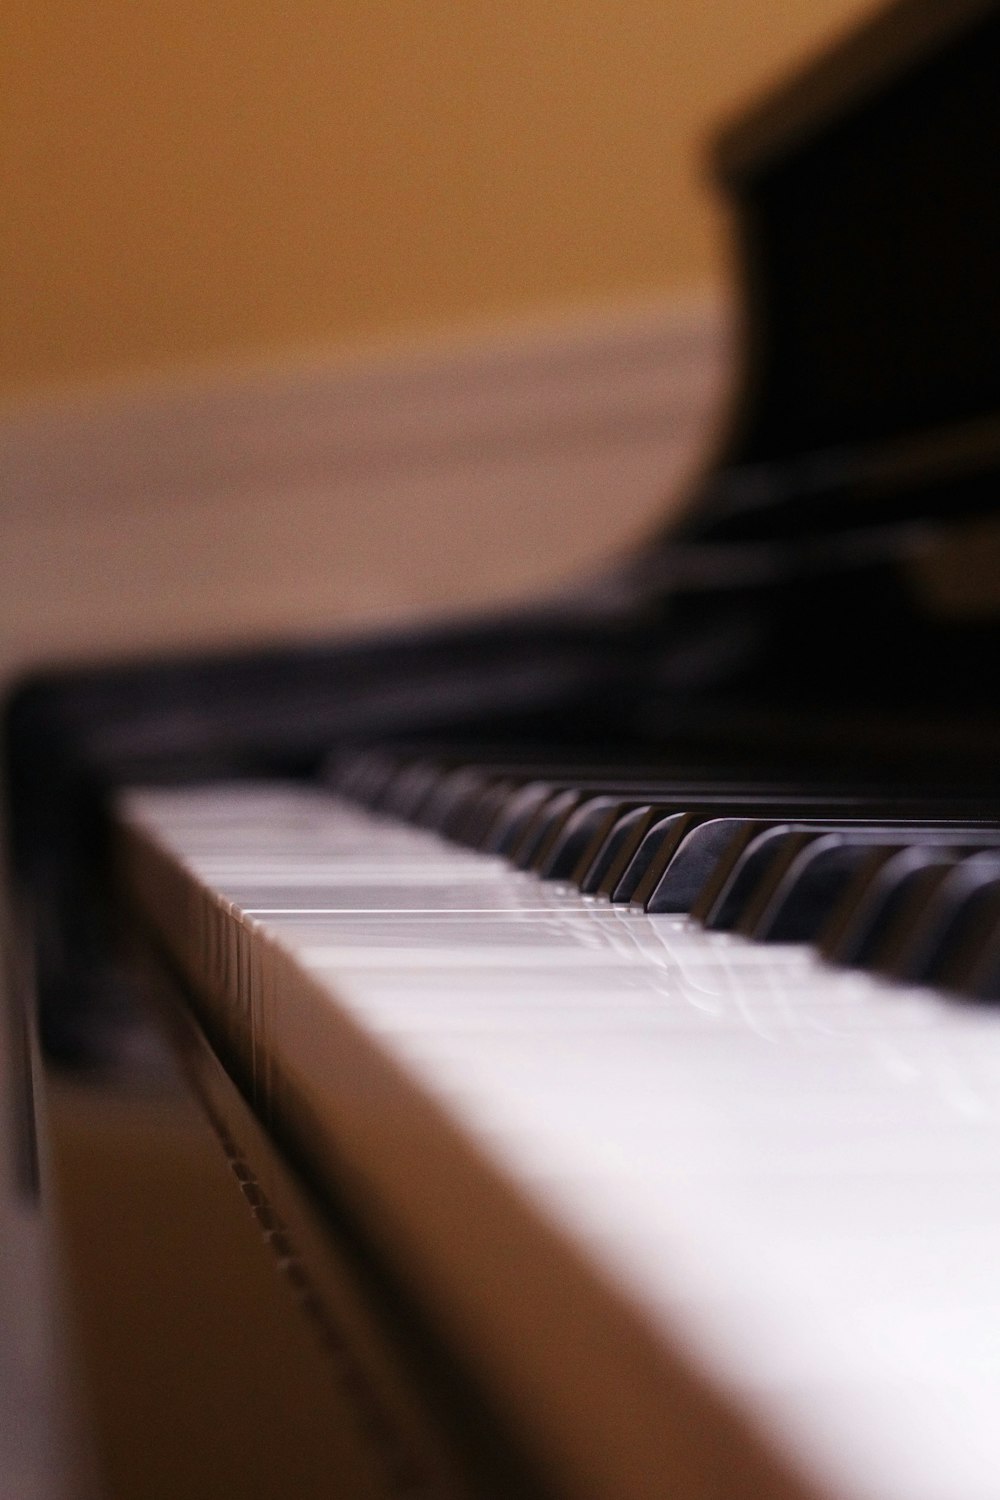 a close up of a black and white piano